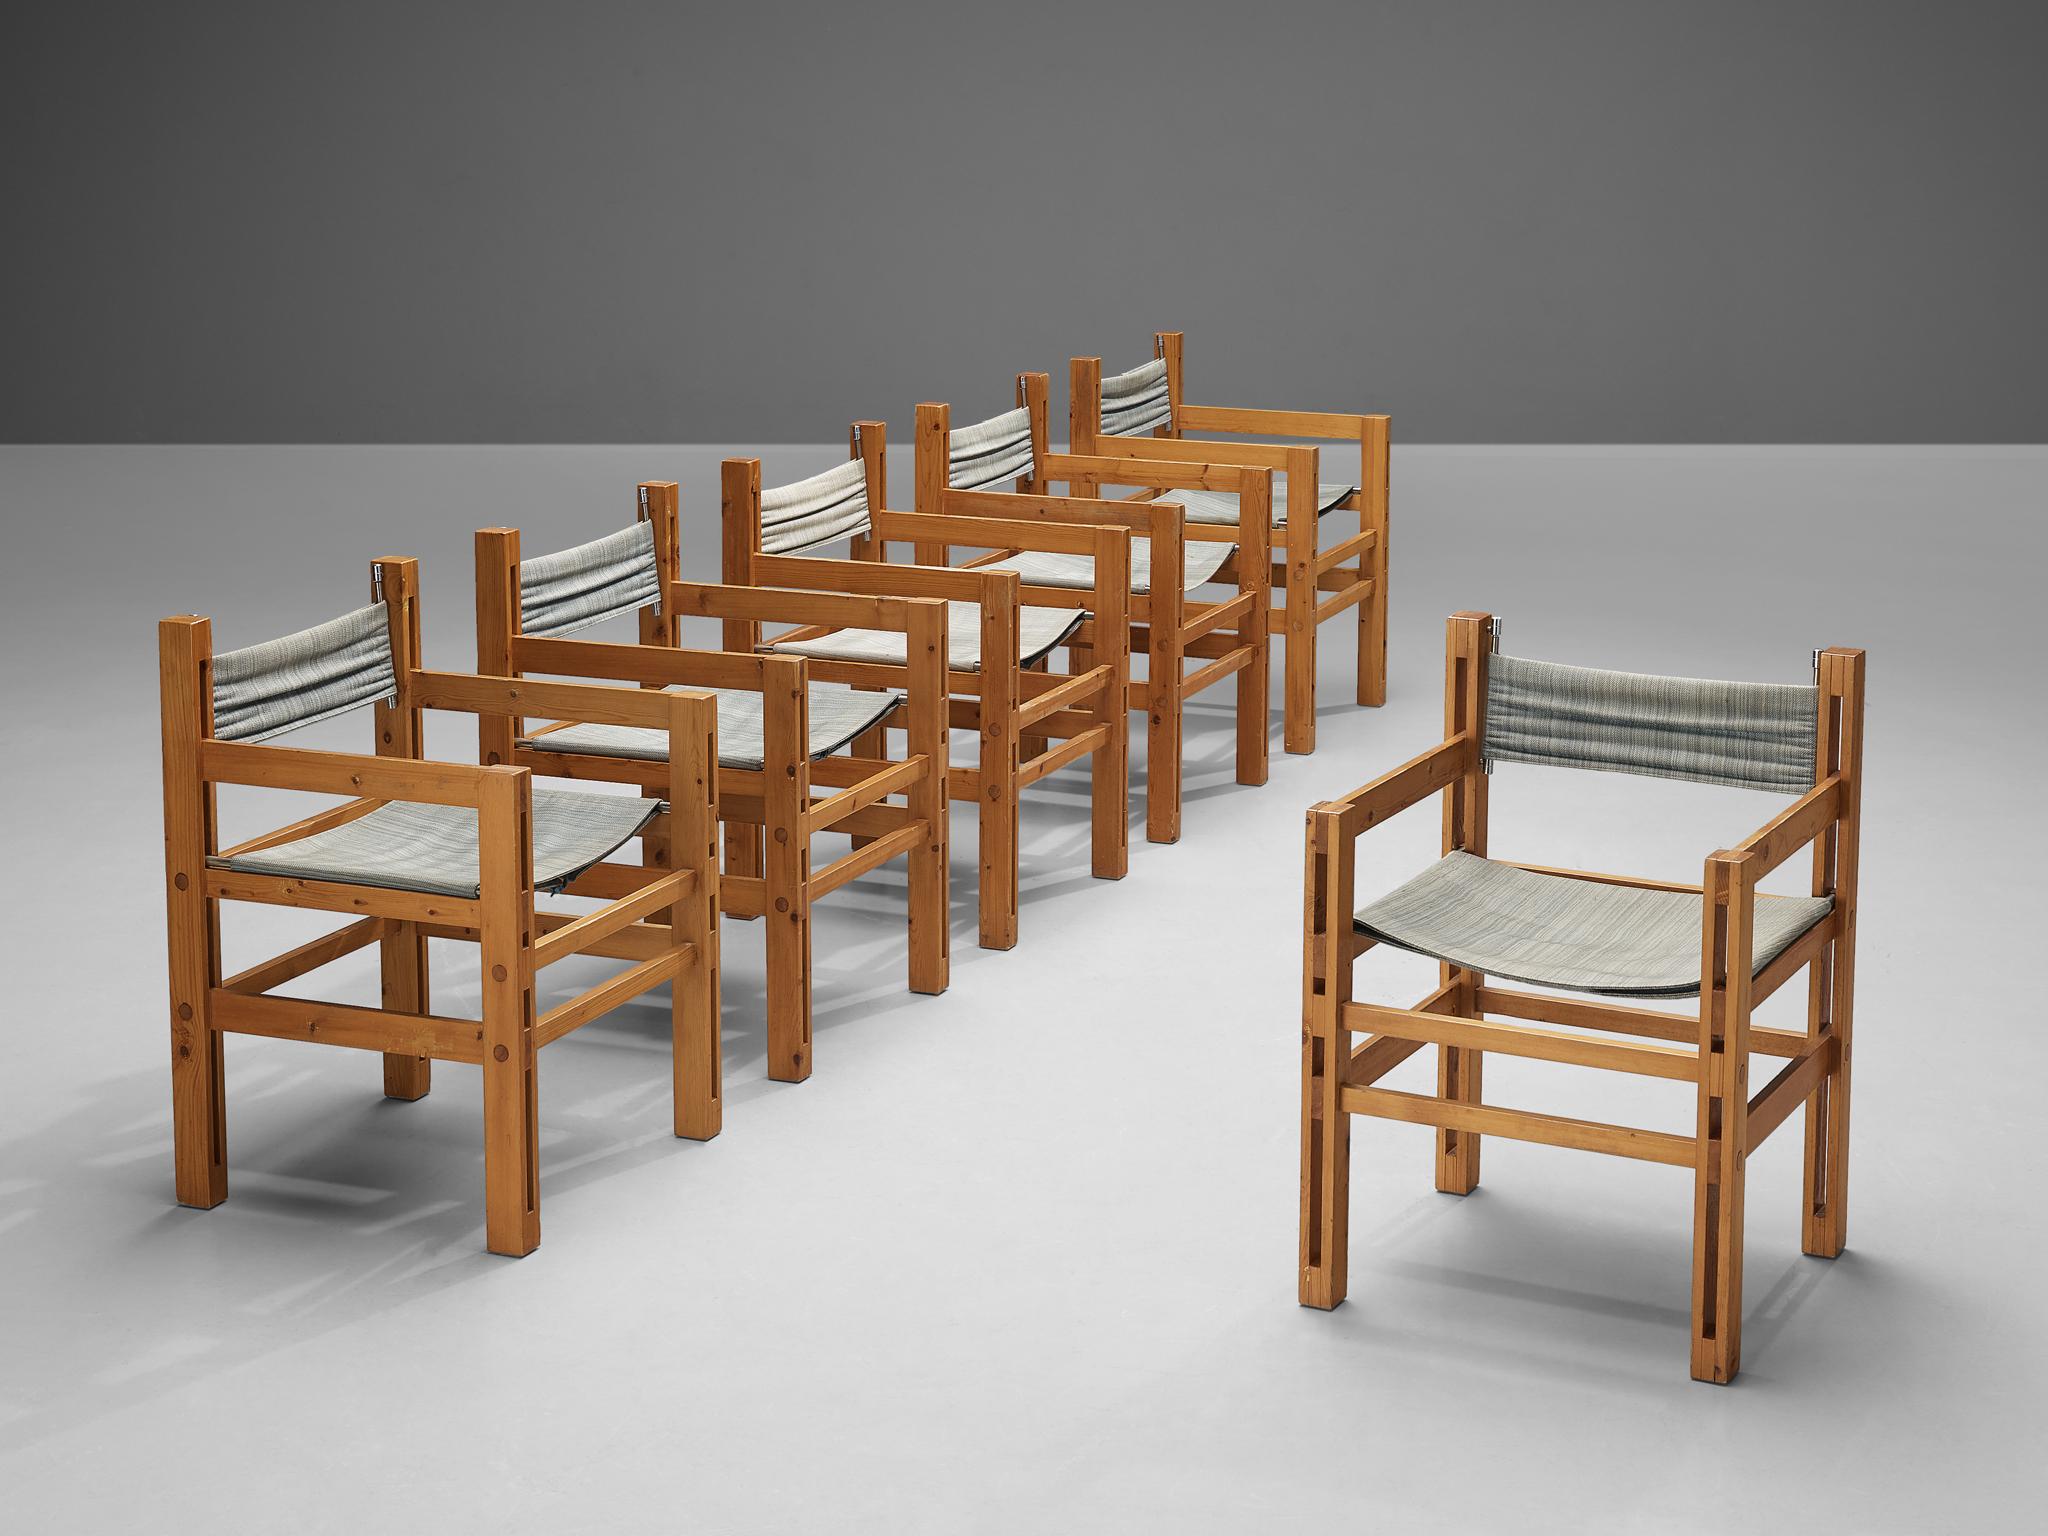 Set of six armchairs, pine and fabric, Italy, 1970s.

This set of six armchairs from Italy is strict and pure. The chairs feature an architectural pine wooden frame, build up from only horizontal and vertical lines. The vertical slats of the